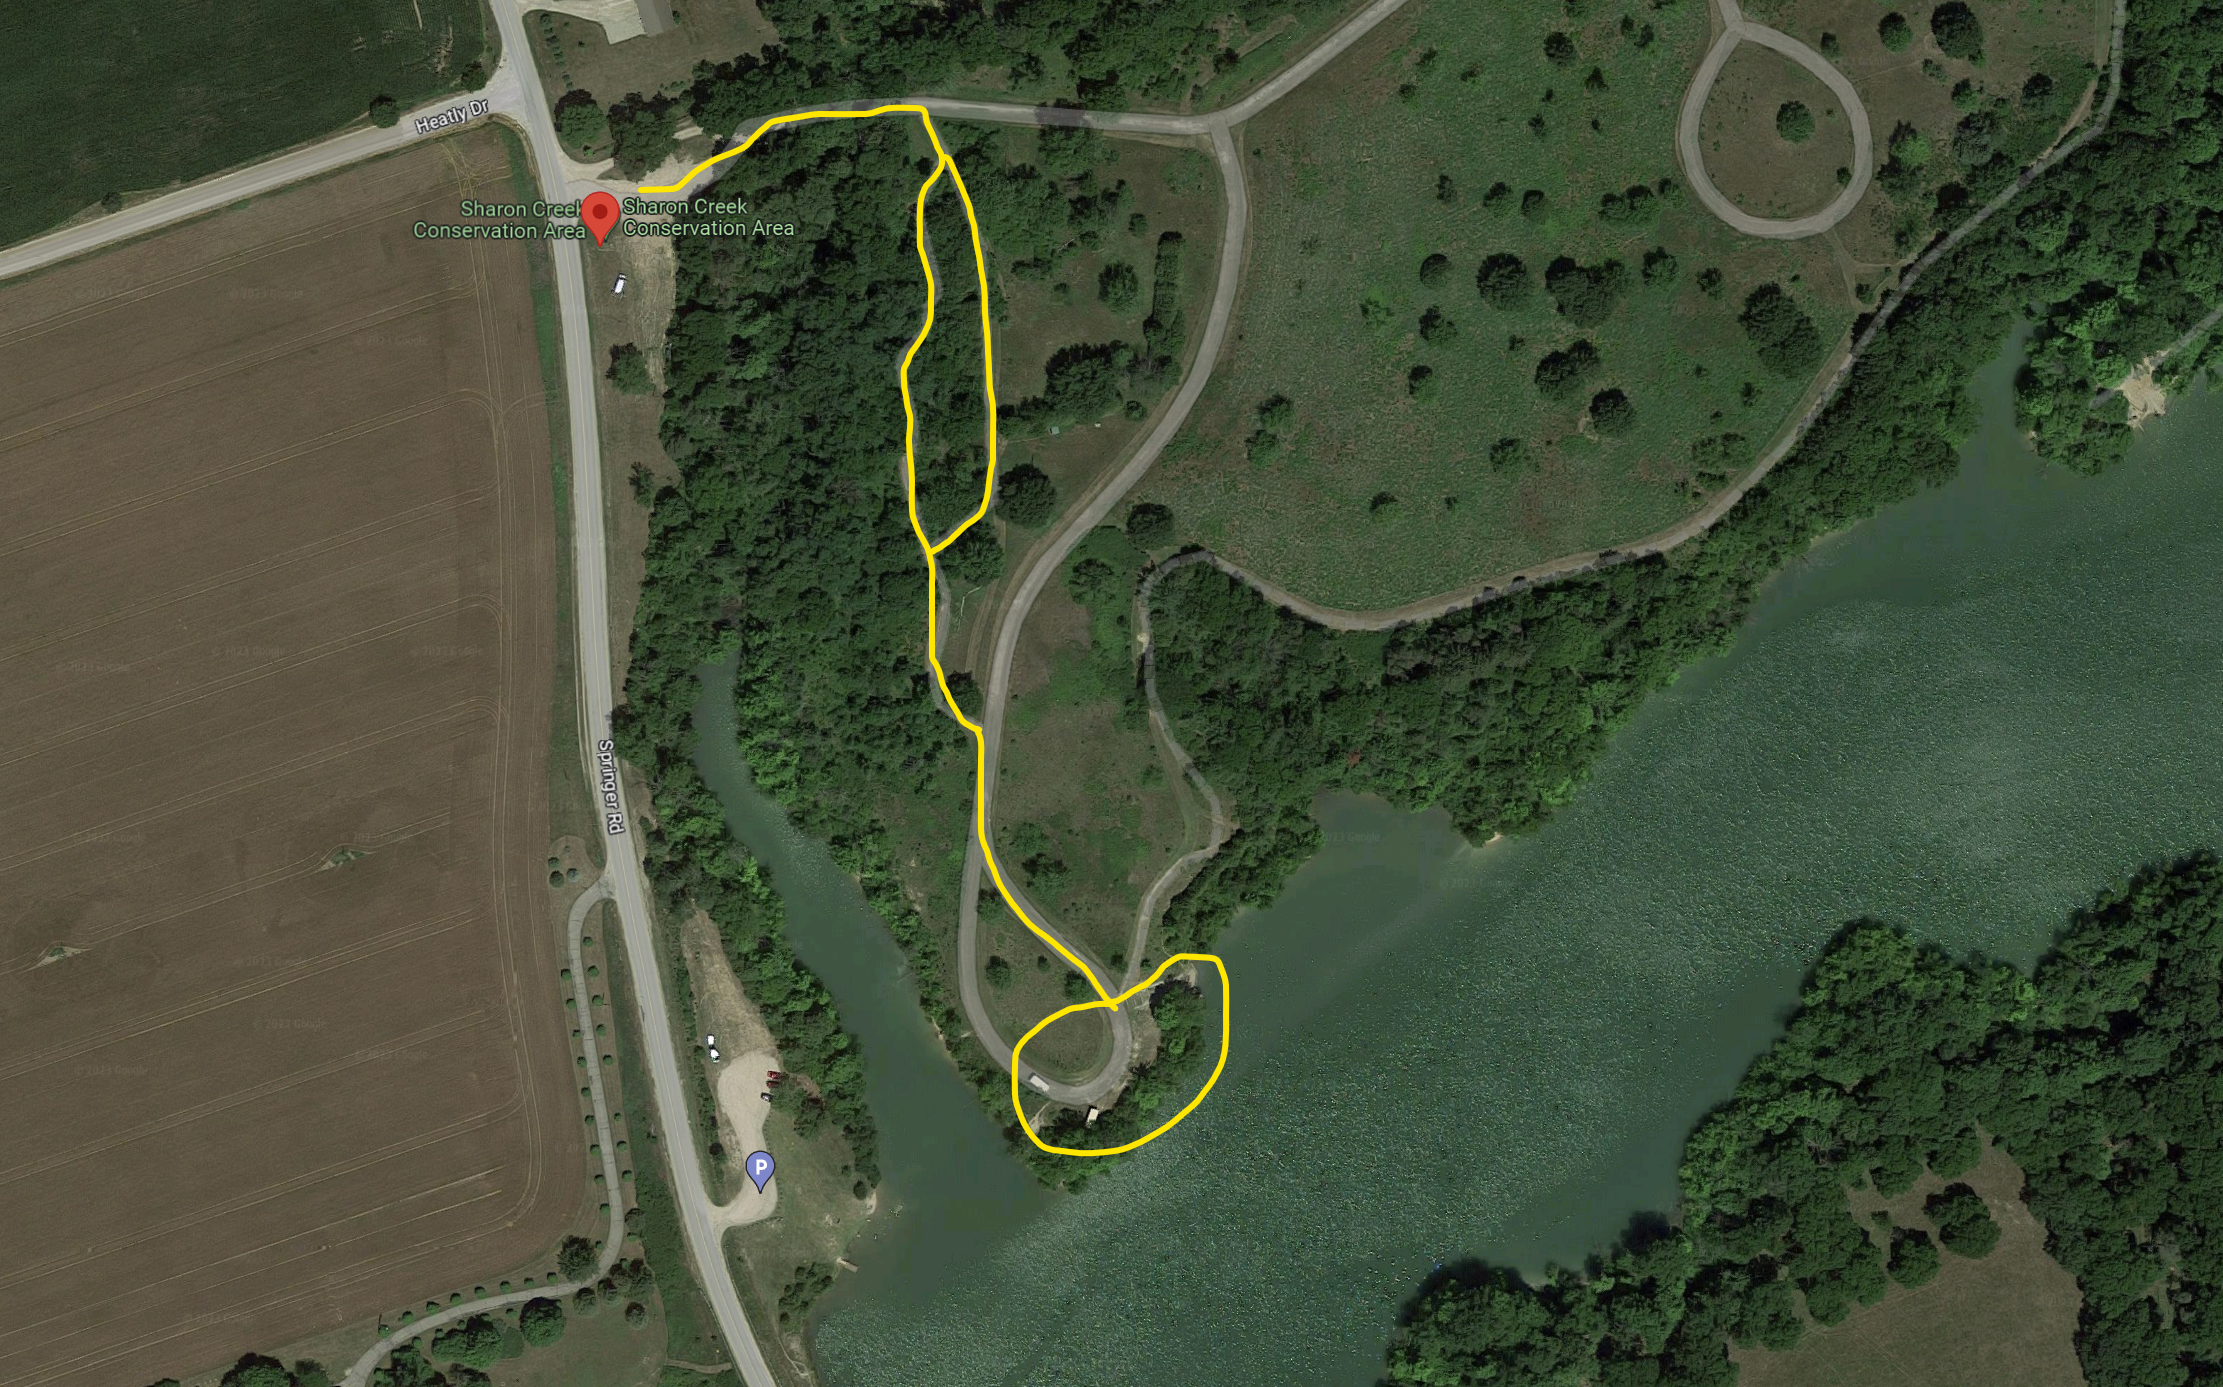 Map showing satellite view of Sharon Creek Conservation area with routes from North parking lot to canoe area drawn